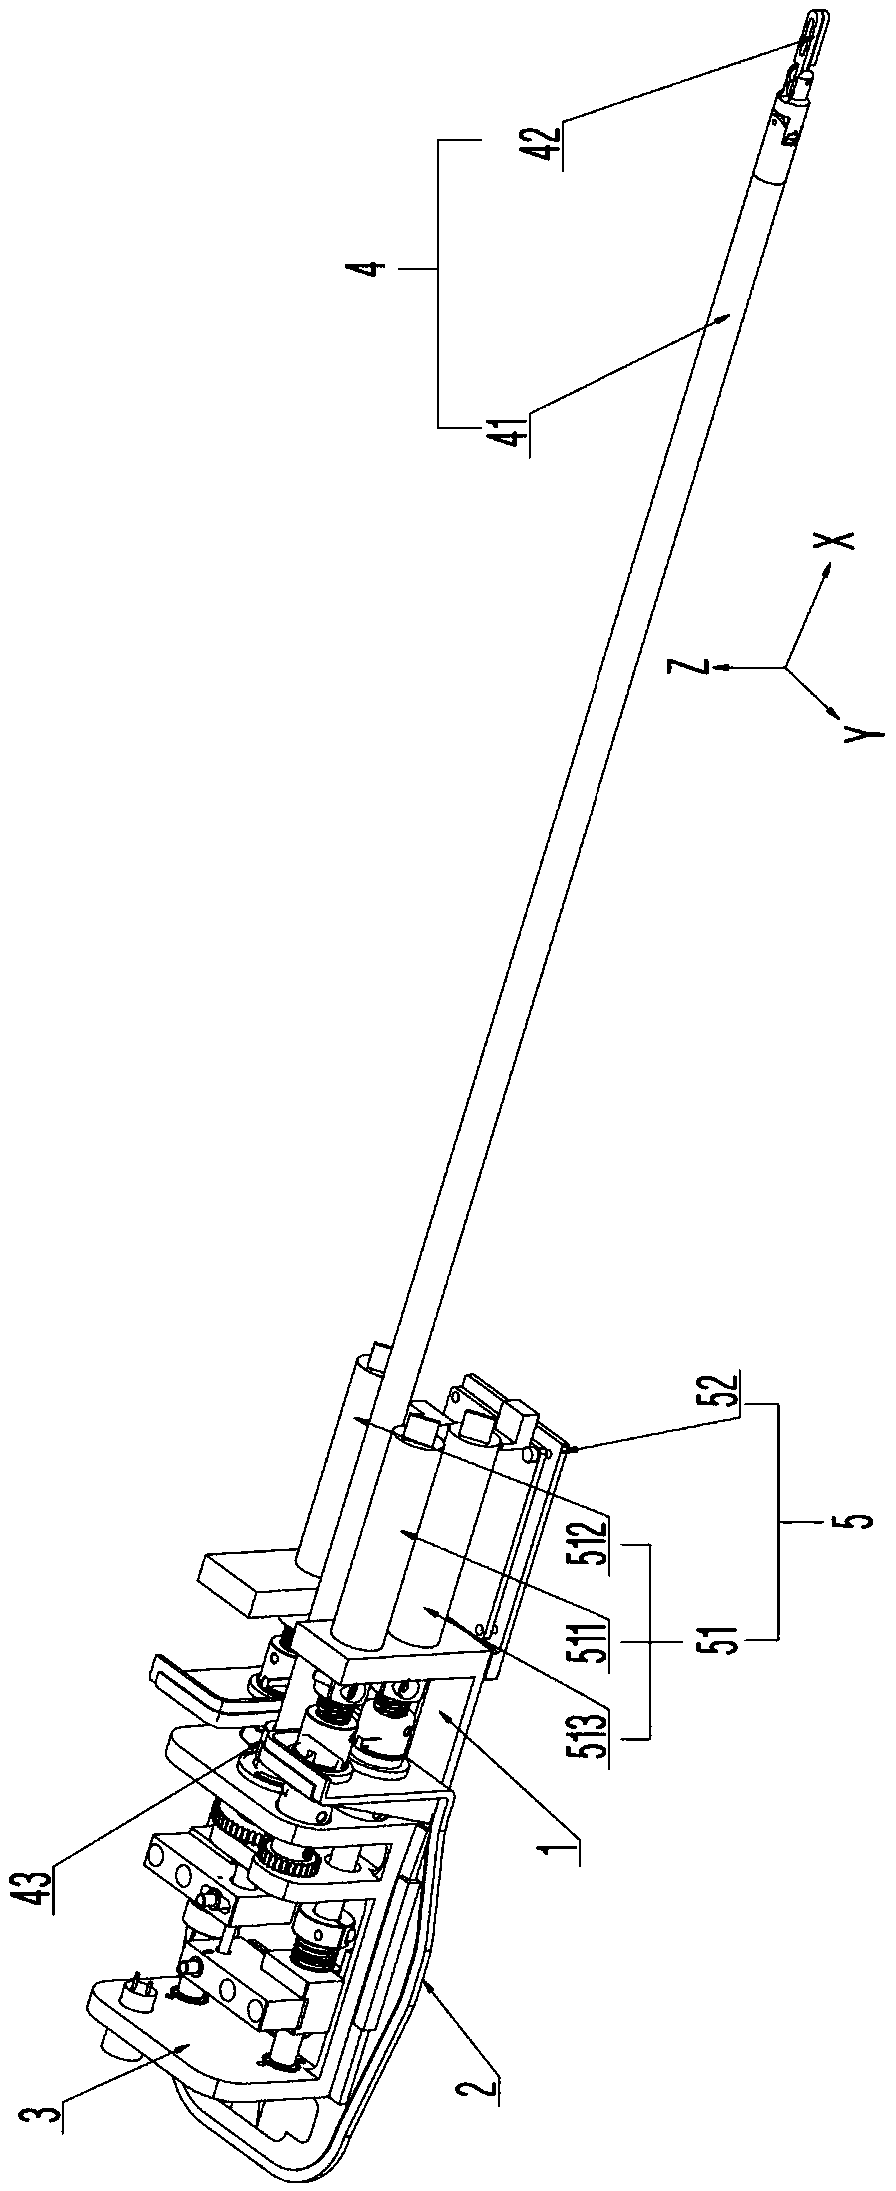 Control method for surgical instrument of endoscope surgical robot